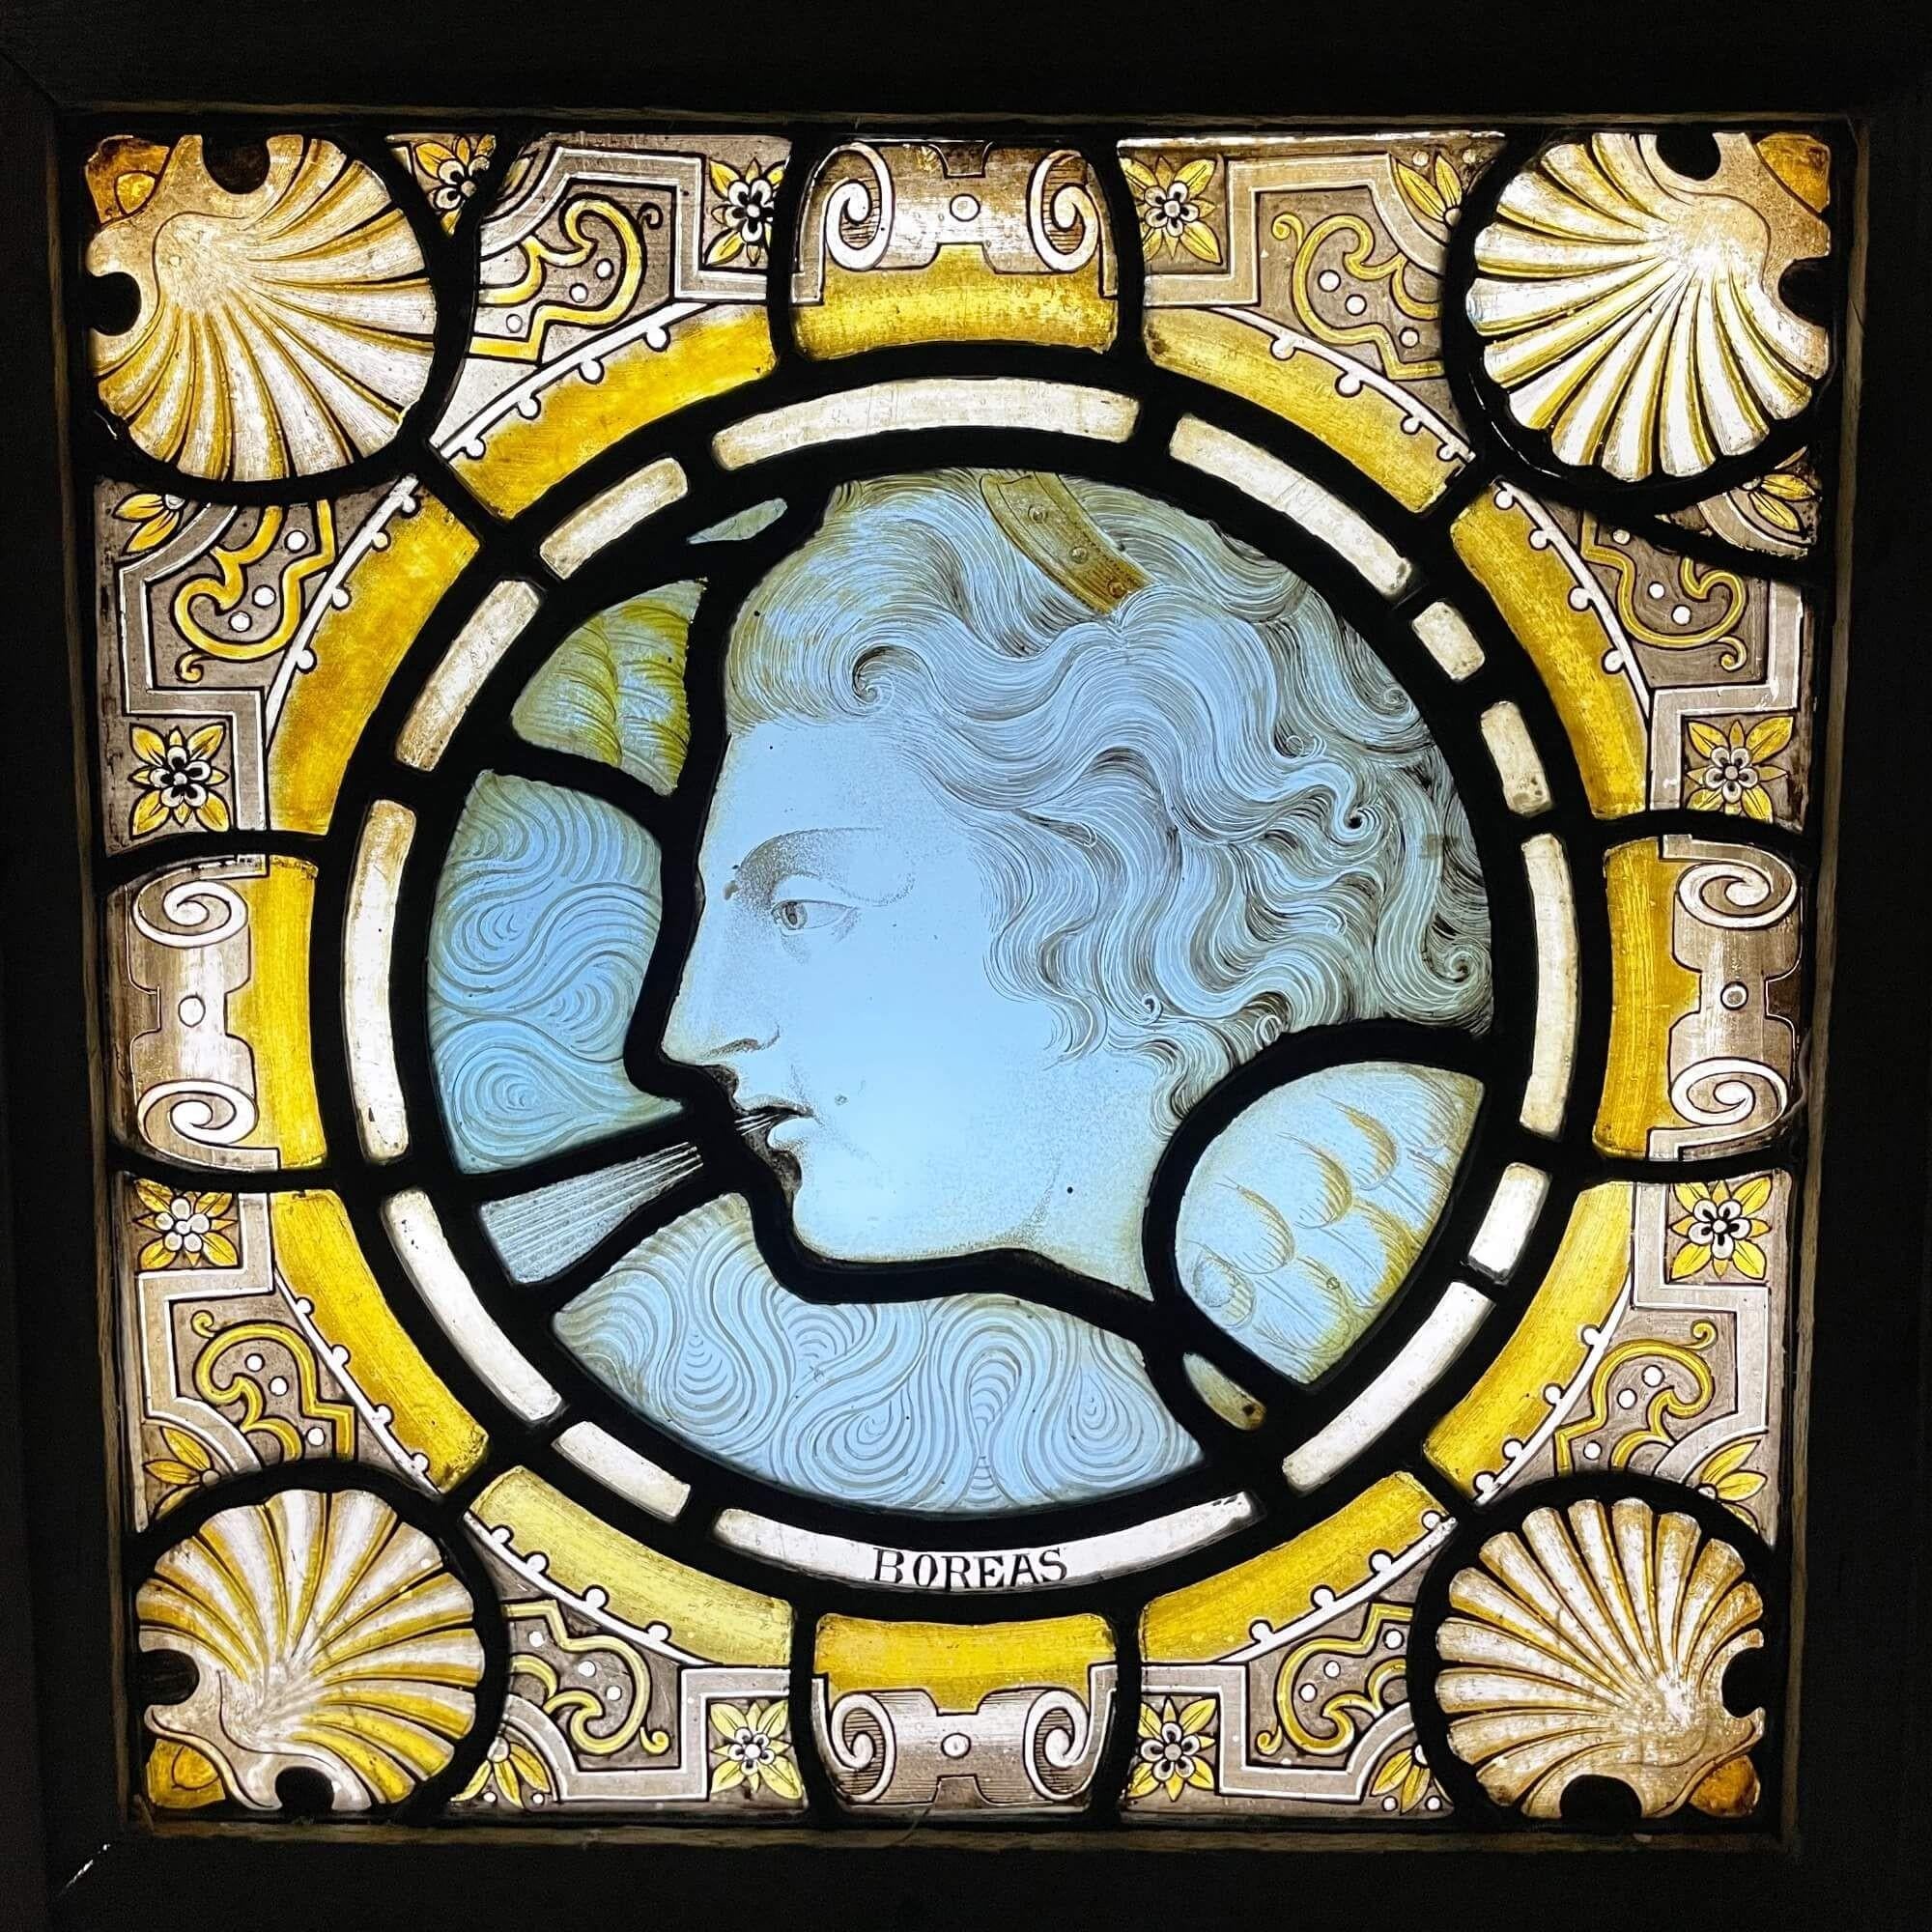 A late 19th century Victorian stained glass window panel depicting Boreas, God of the north wind, one of 3 similar we are selling depicting notable figures of Greek and Roman mythology.

This vibrant piece was previously owned by Seymour Stein -